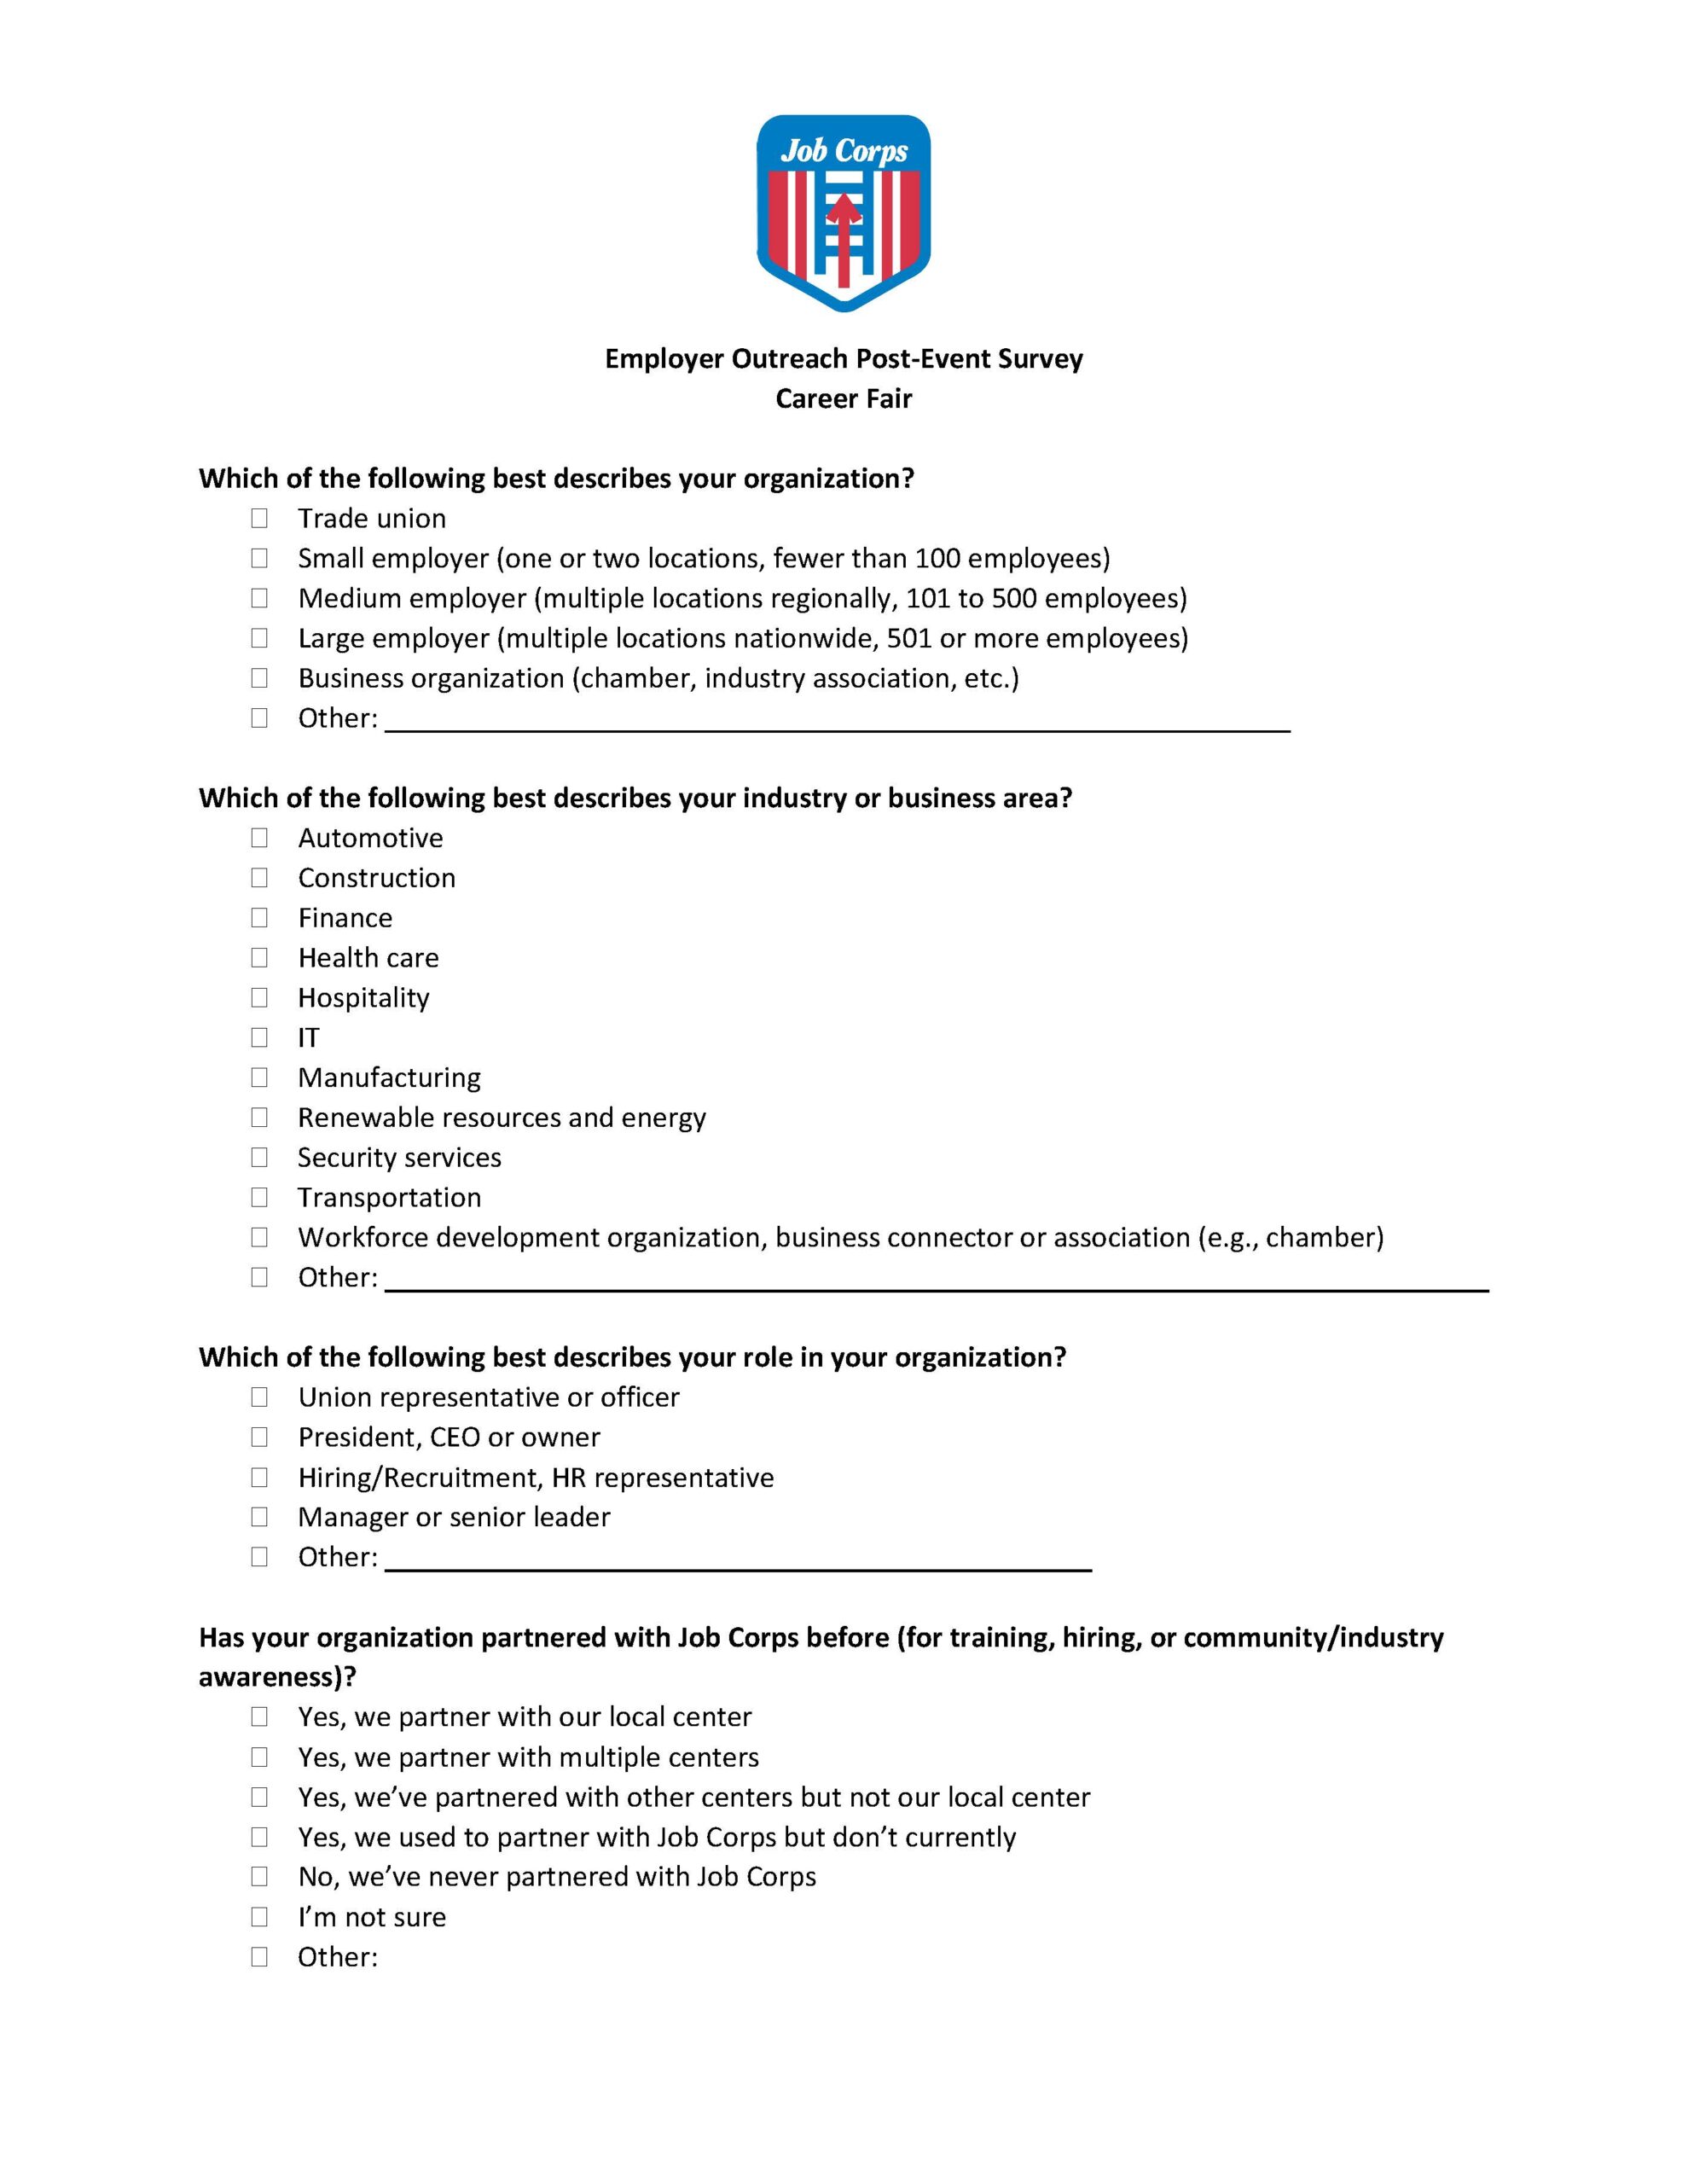 Post Event Survey Career Fairs Page 1